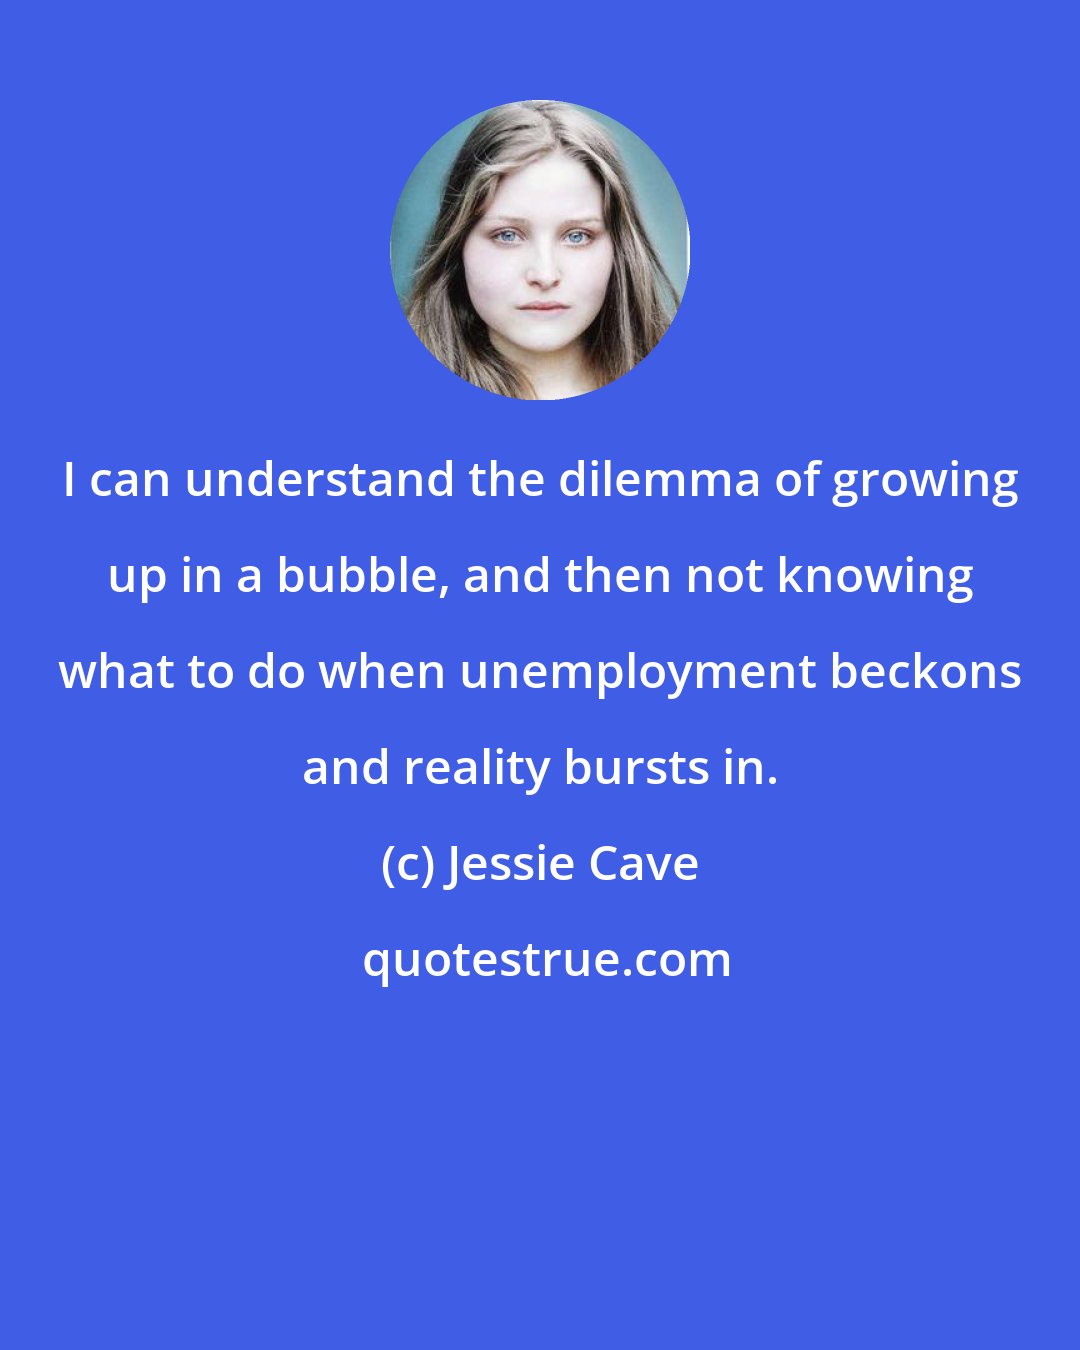 Jessie Cave: I can understand the dilemma of growing up in a bubble, and then not knowing what to do when unemployment beckons and reality bursts in.